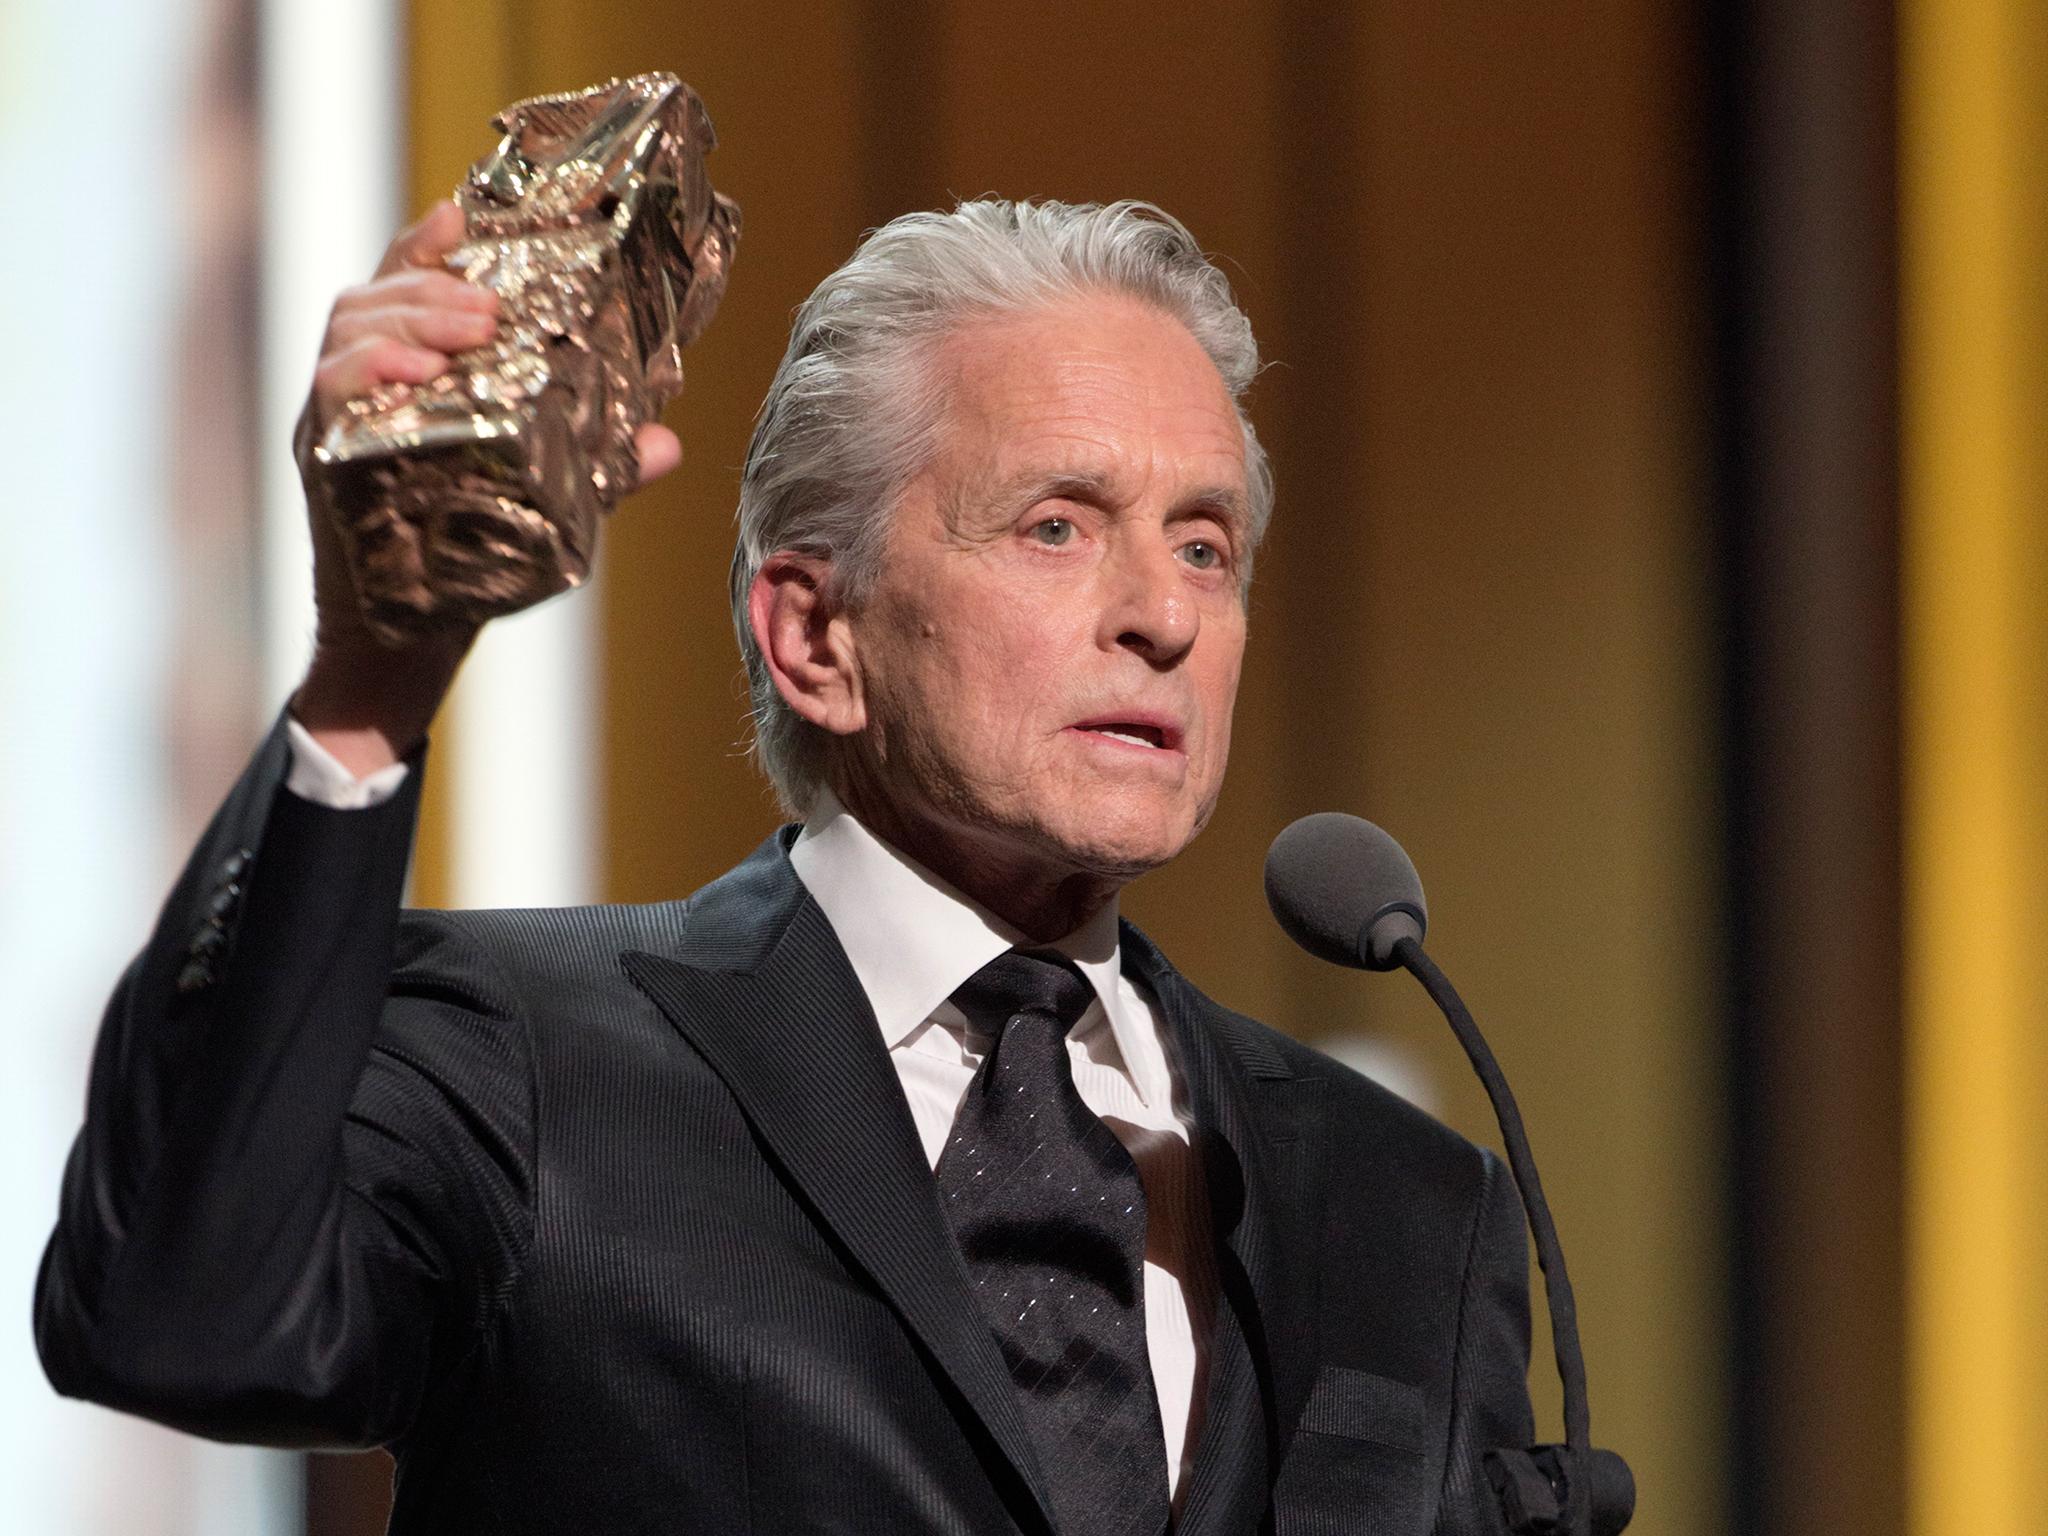 Best Performance by an Actor in a Television Series - Musical or Comedy: Michael Douglas (The Kominsky Method)